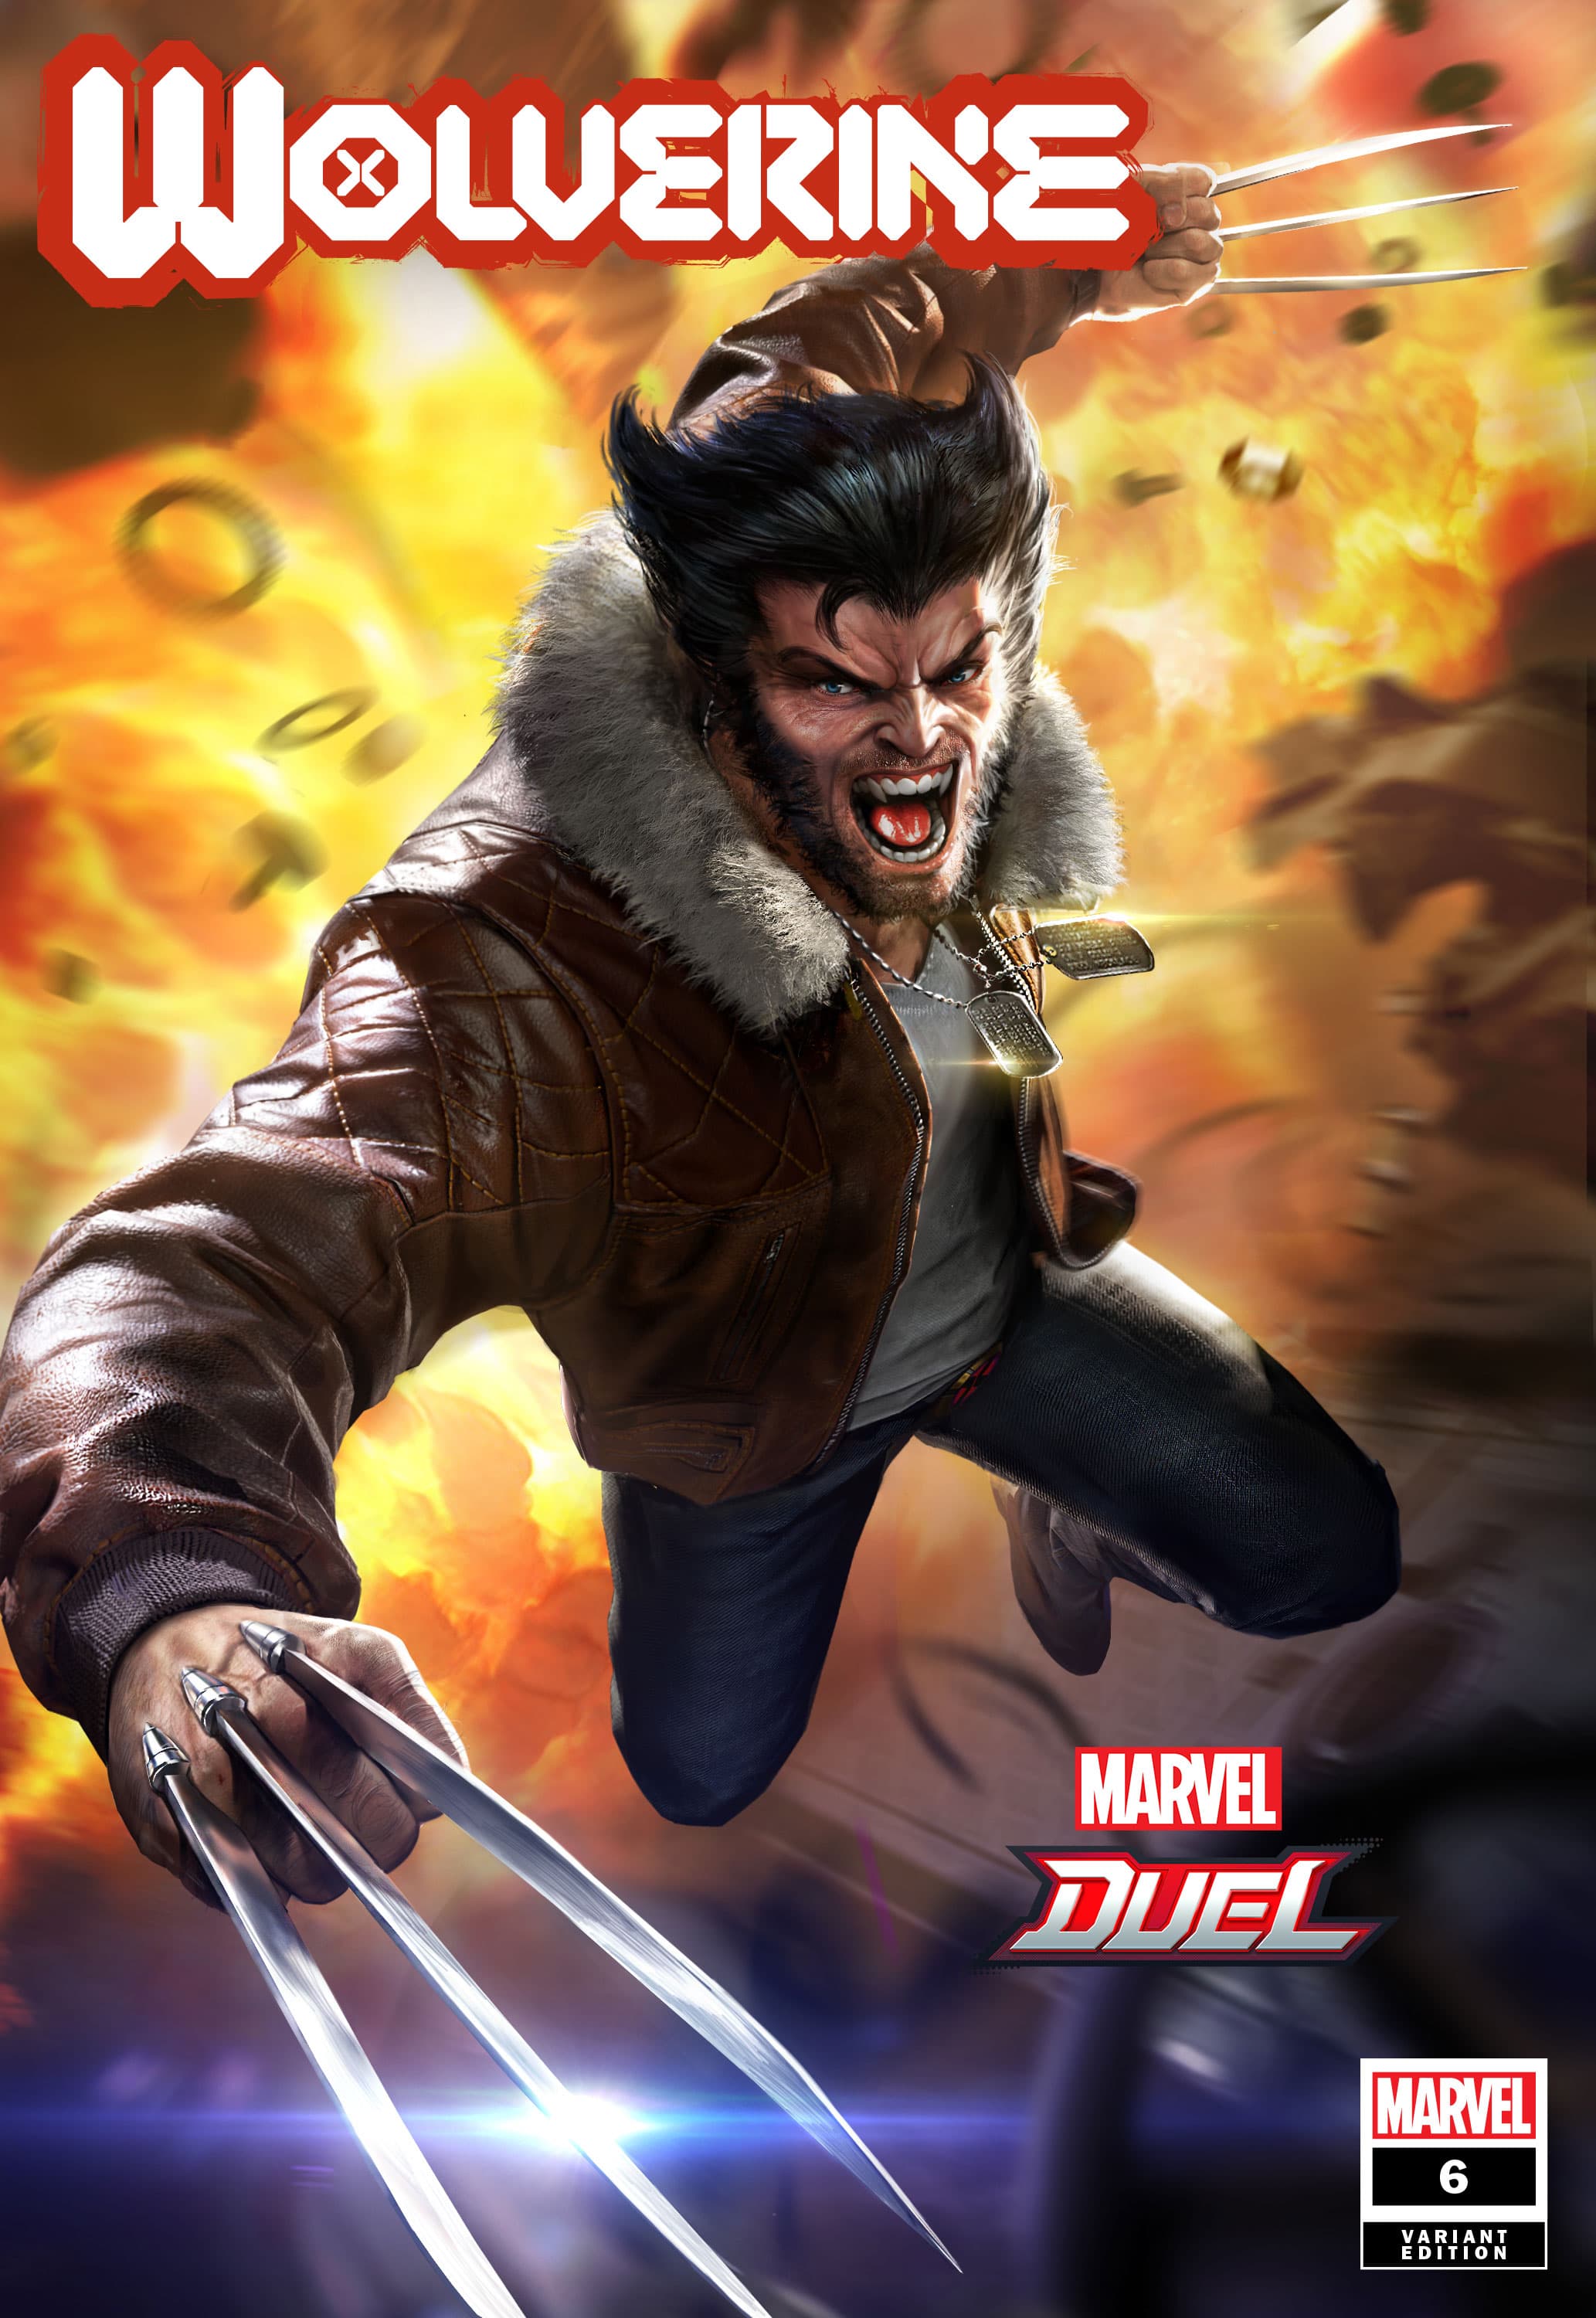 Marvel Heroes Are Unleashed in New NetEase Games Variant Covers